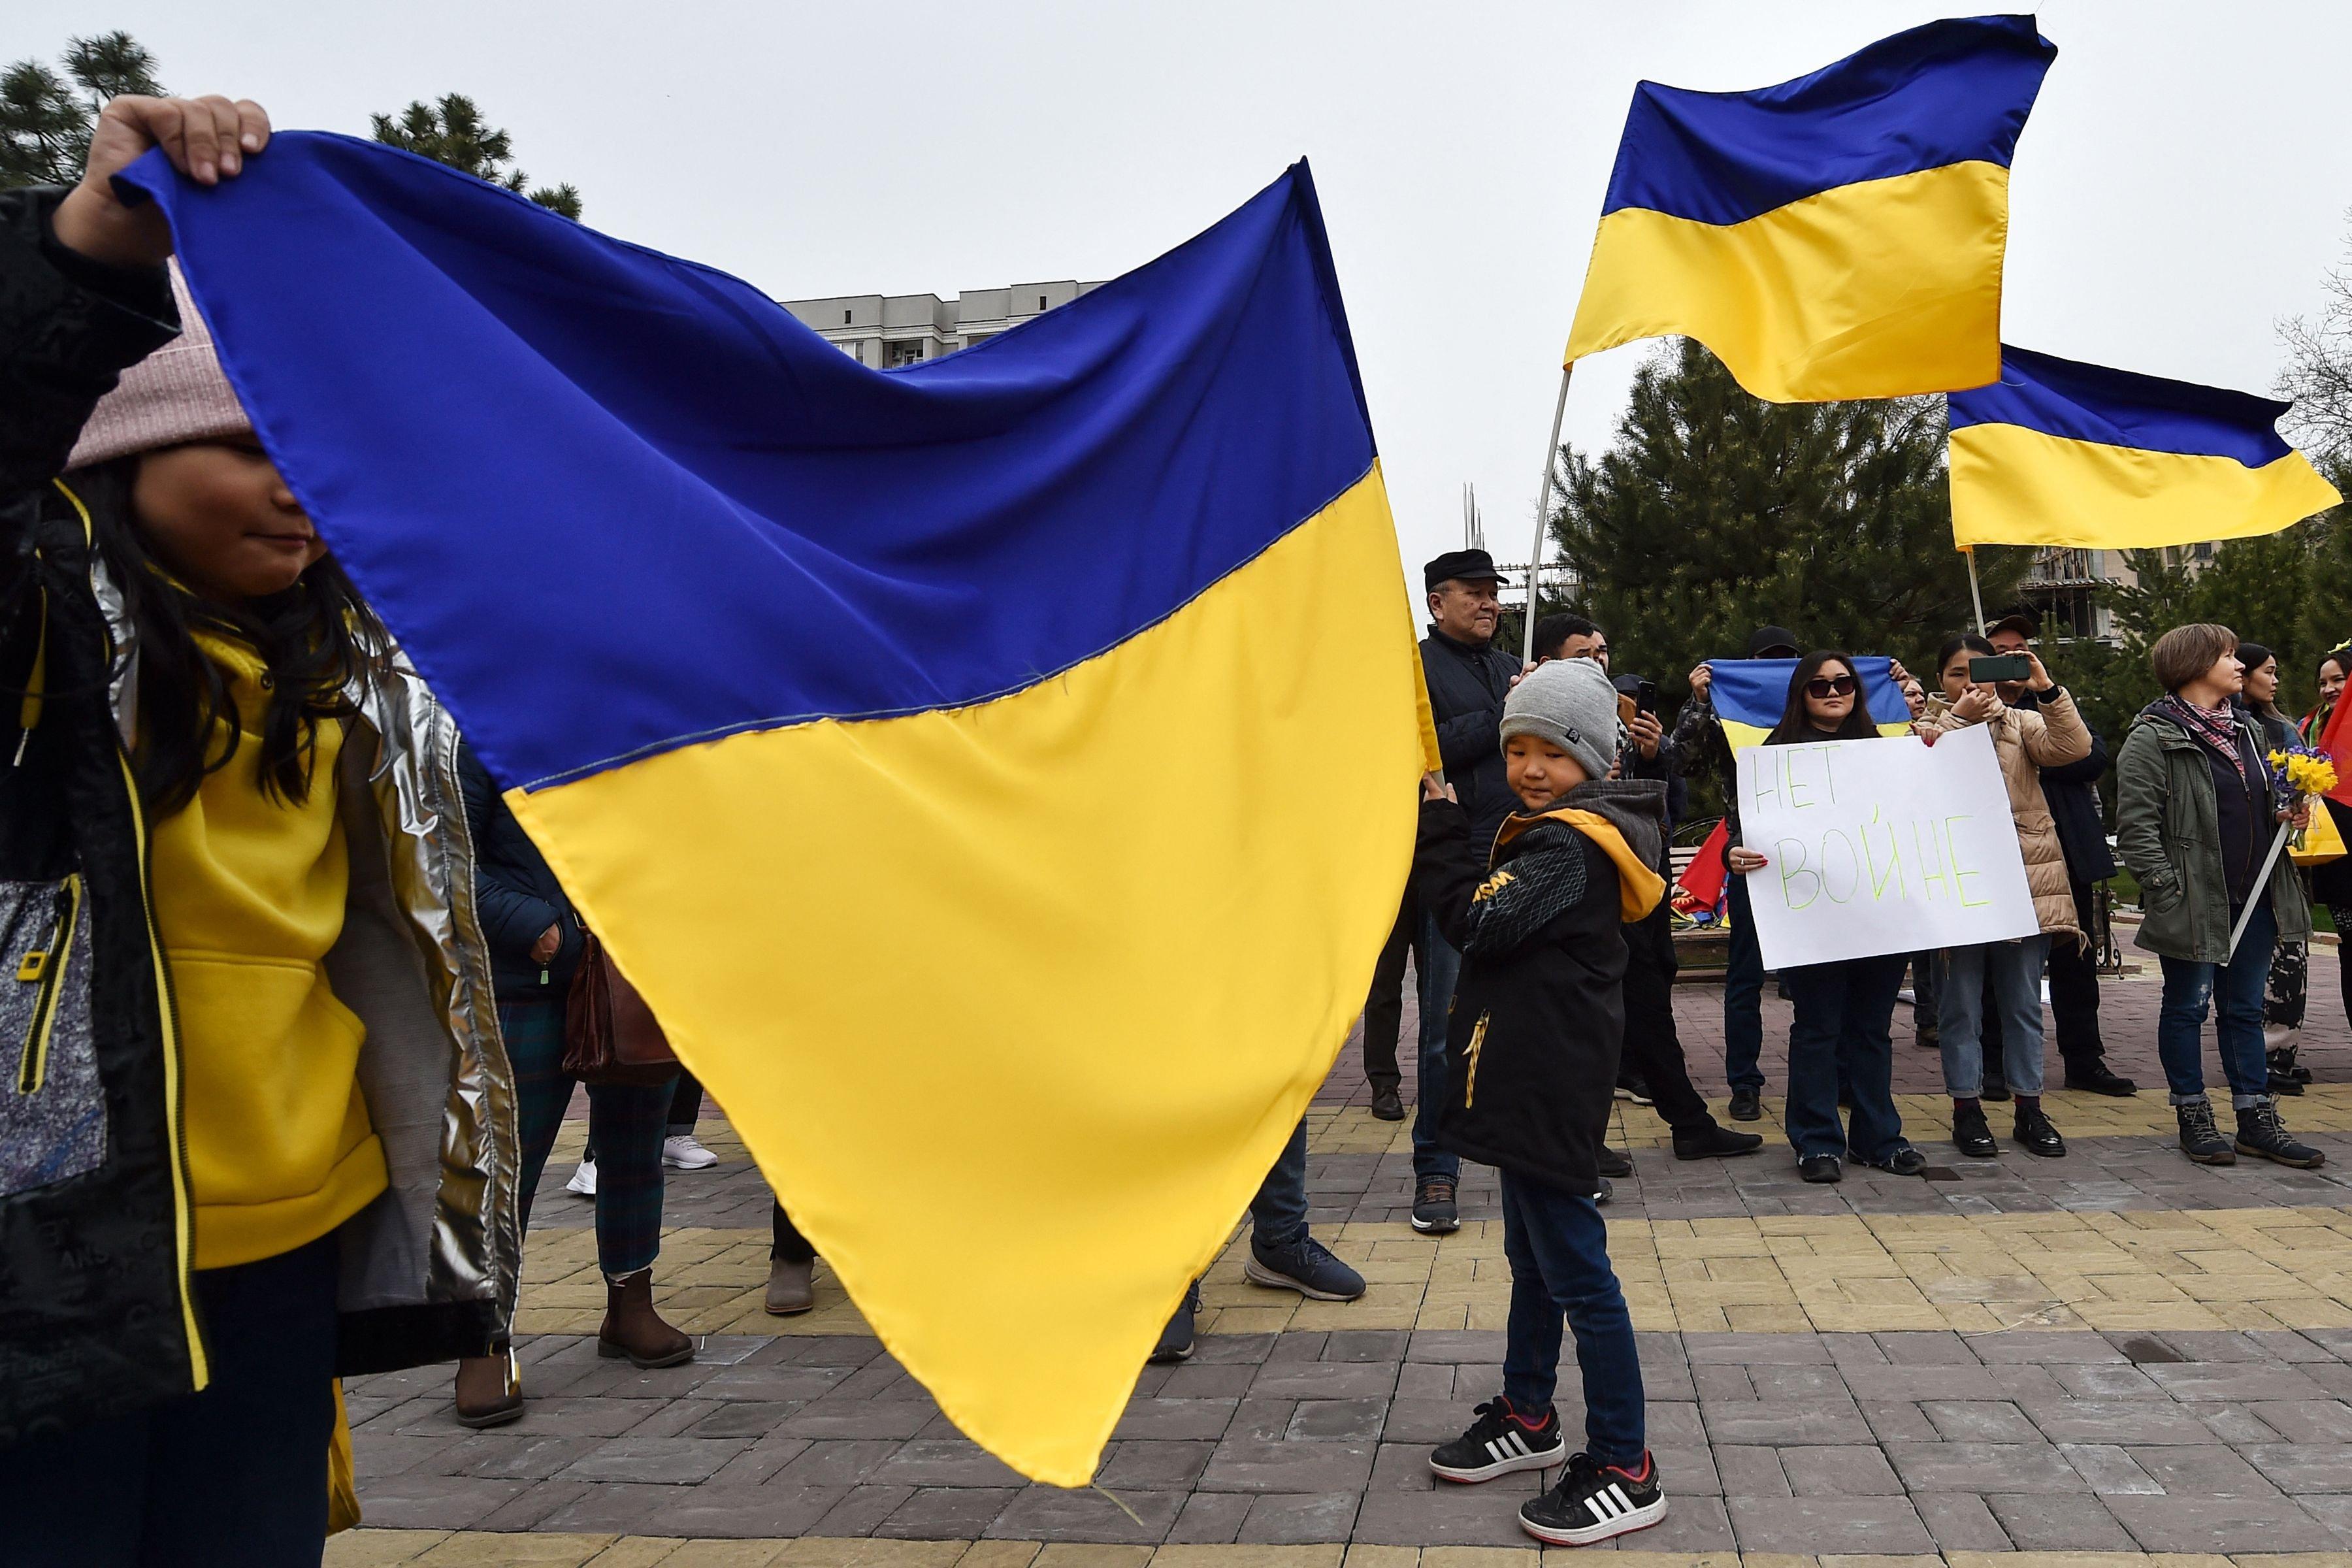 Demonstrators attend a rally against ongoing Russian military action in Ukraine in central Bishkek on March 26, 2022